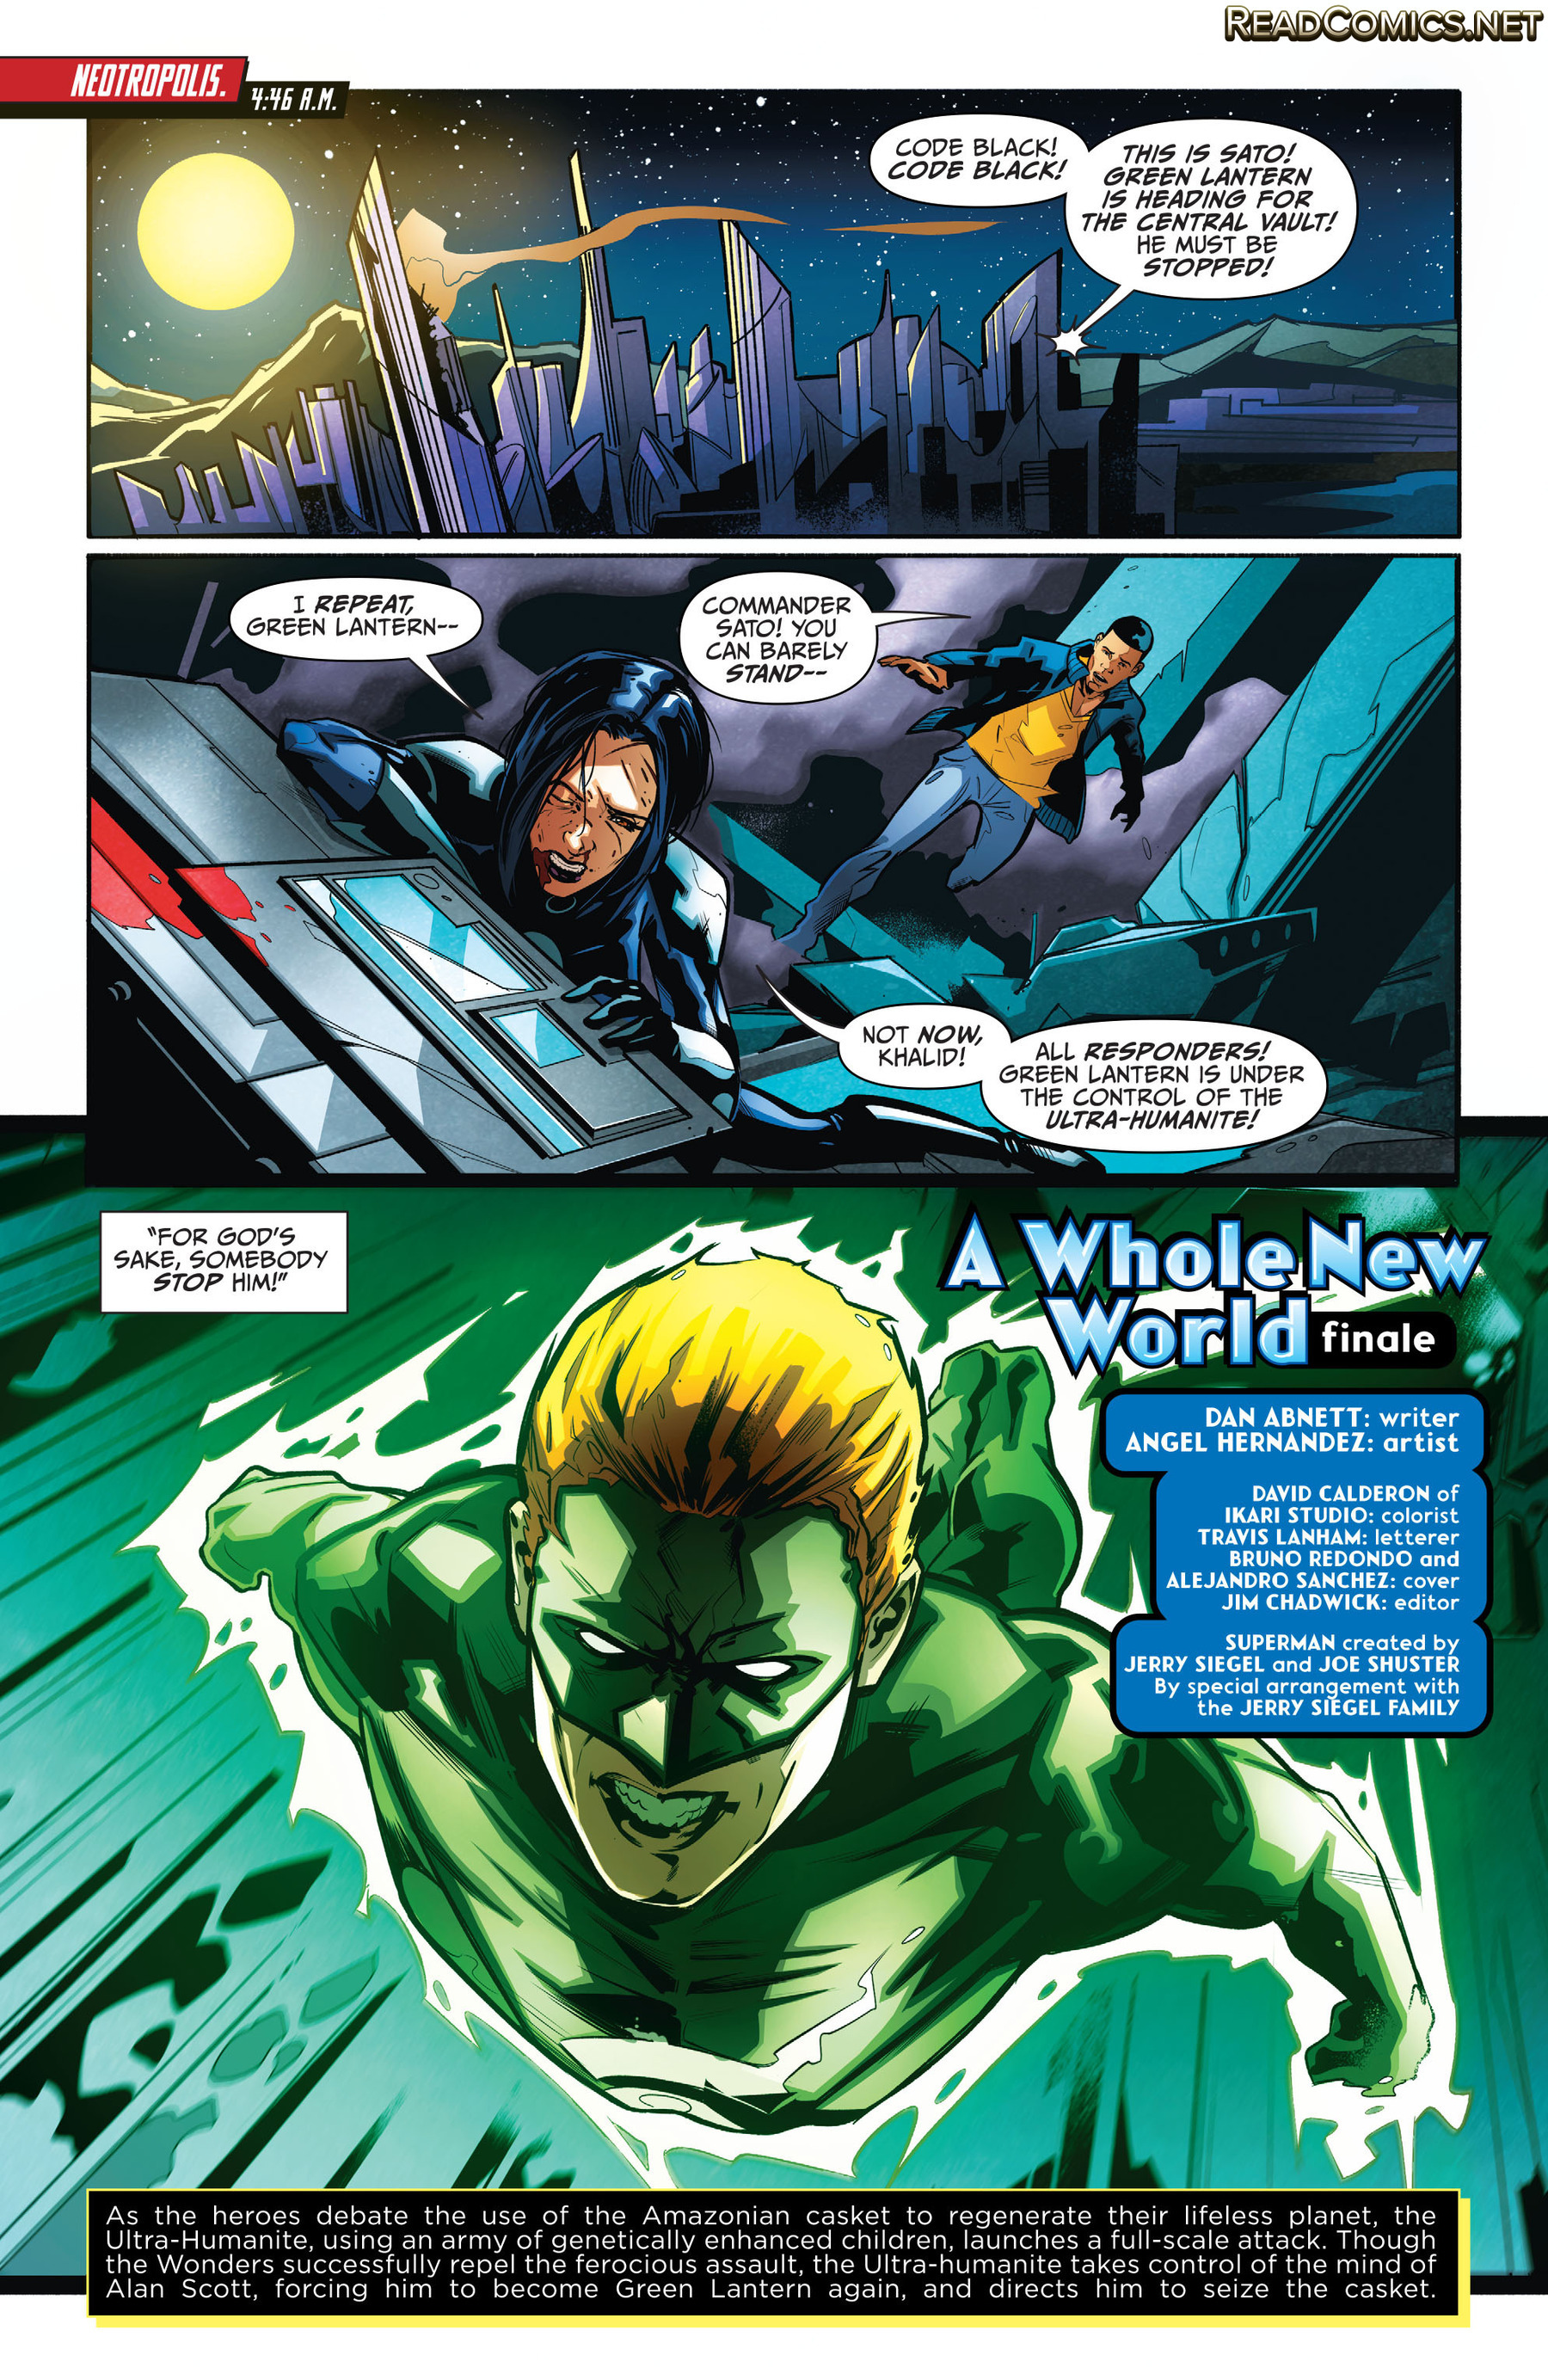 Earth 2 - Society (2016-): Chapter 16 - Page 3